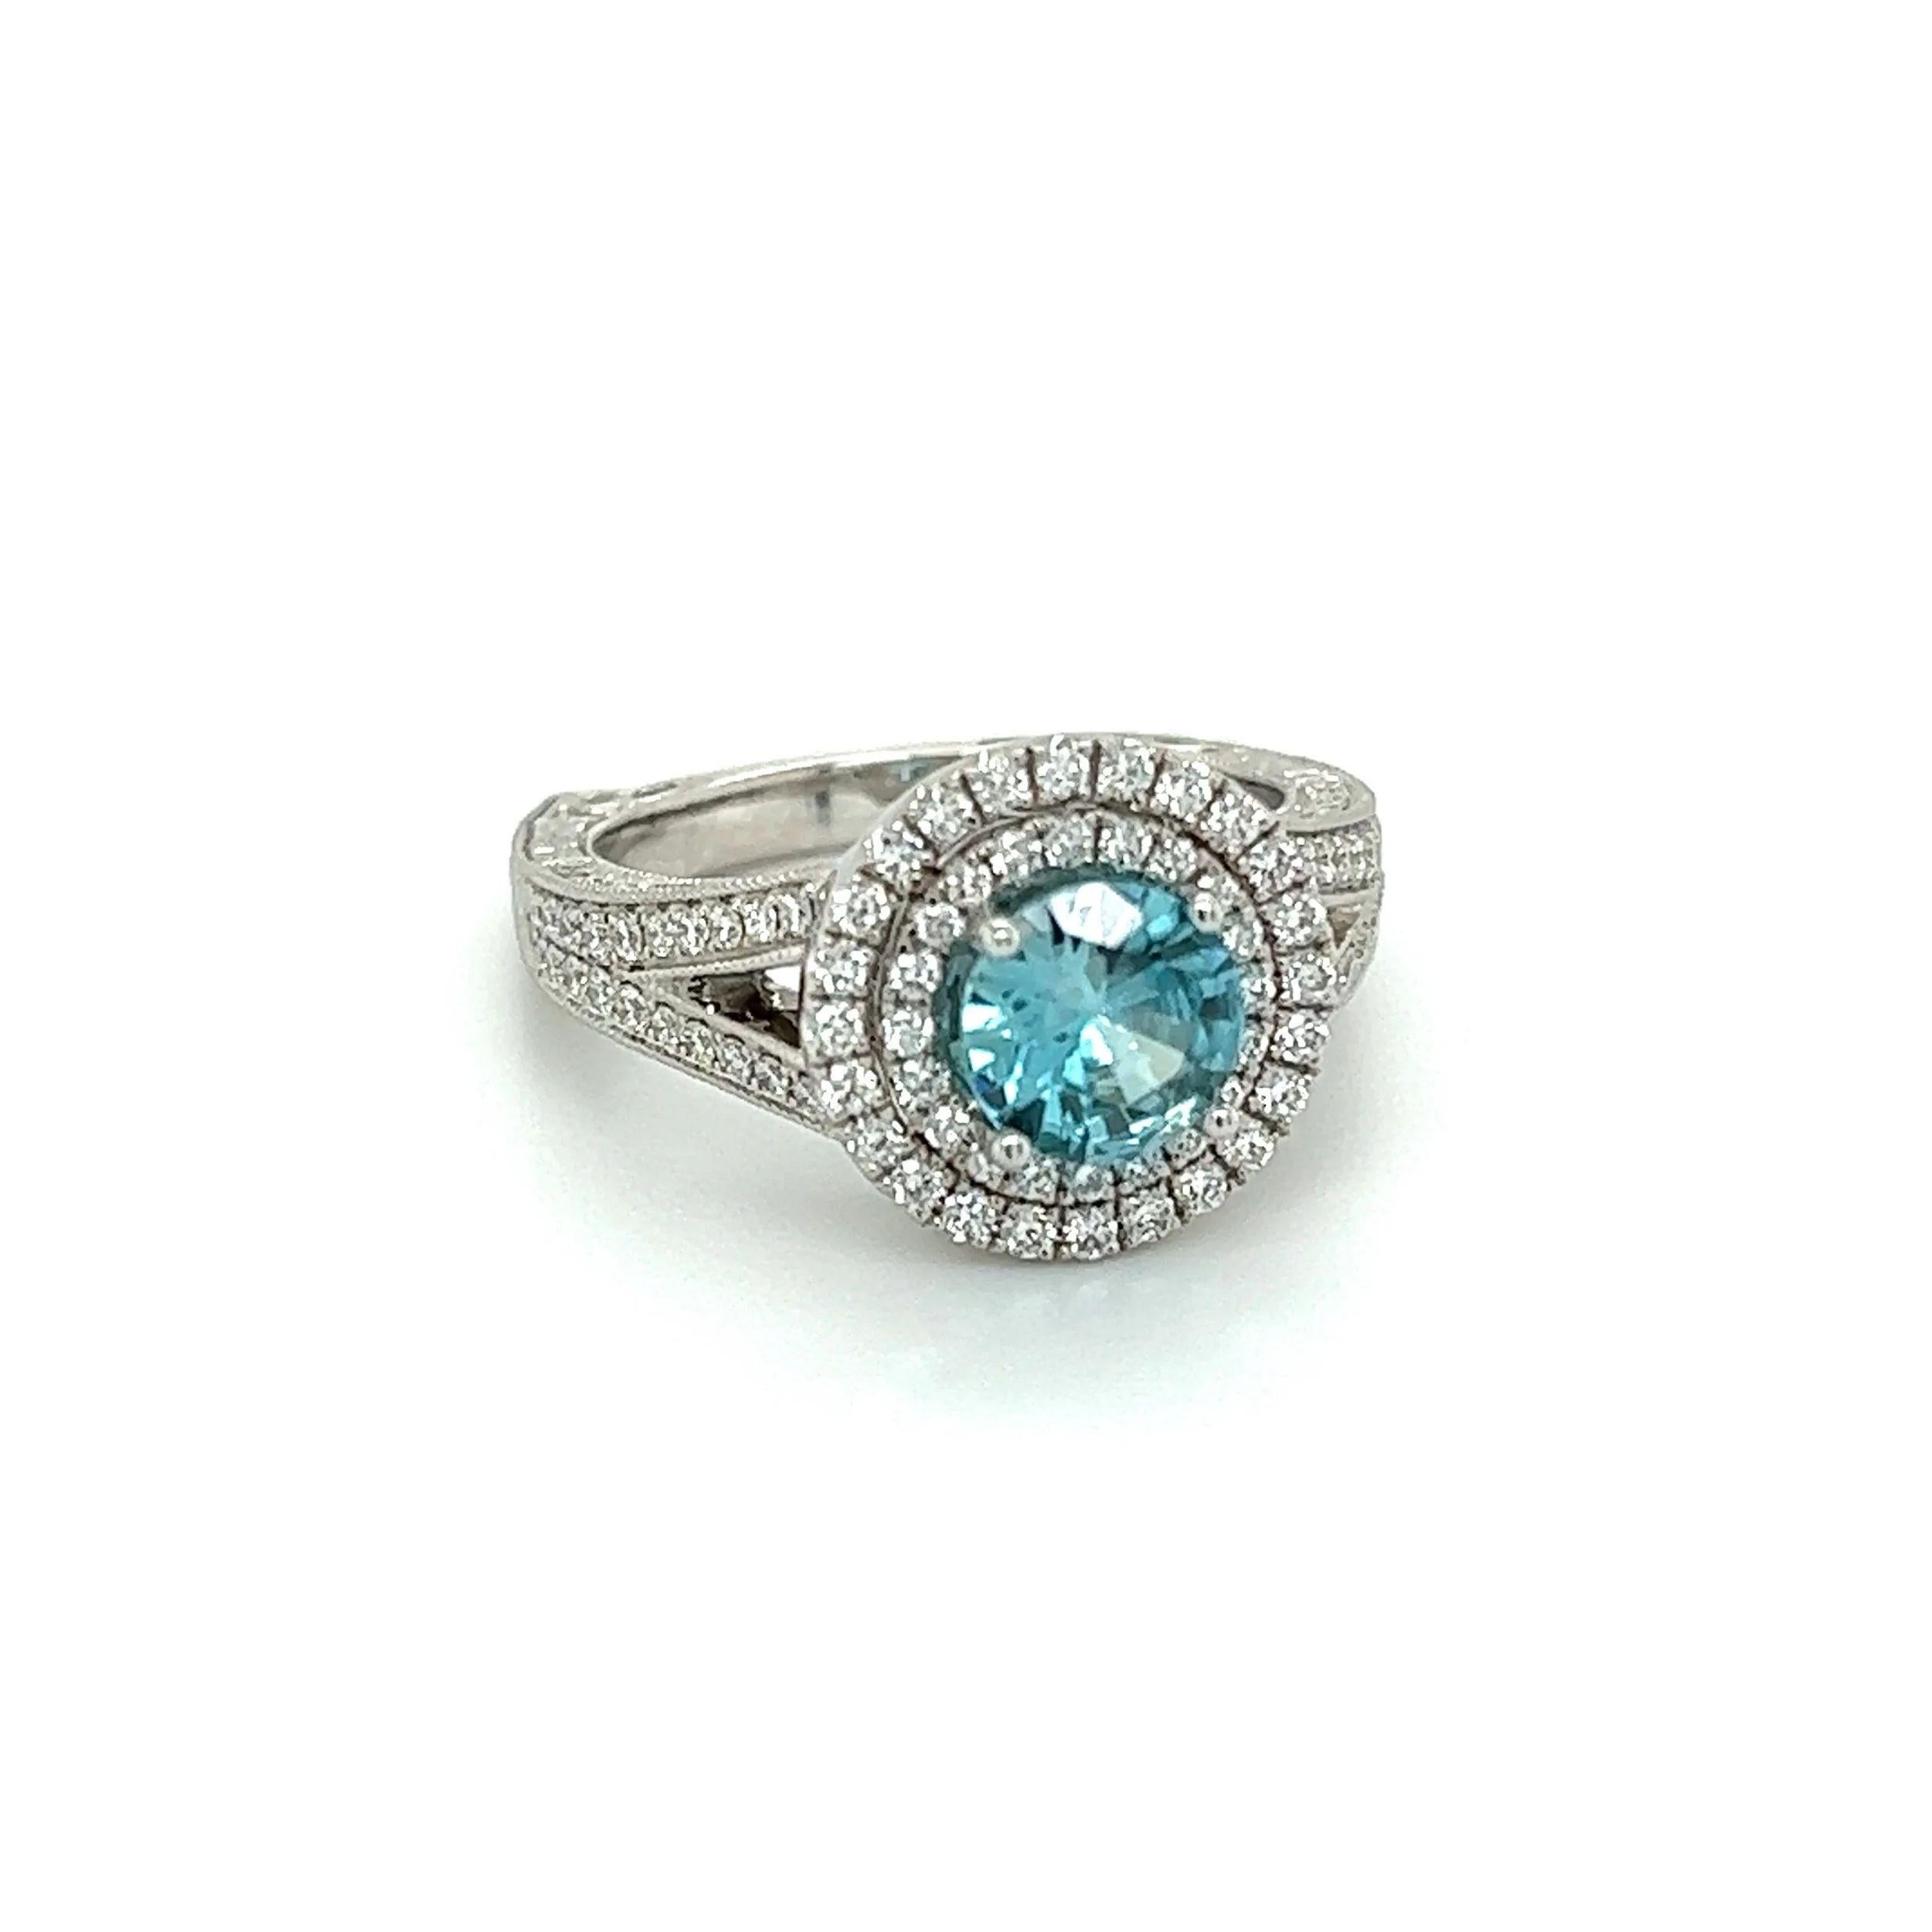 Simply Beautiful! Finely detailed Blue Zircon and Diamond Gold Cocktail Ring. Centering a securely nestled Hand set 1.33 Round Blue Zircon. Surrounded by Round Diamonds, including Fabulous European design shank weighing approx. 1.01tcw. Approx.